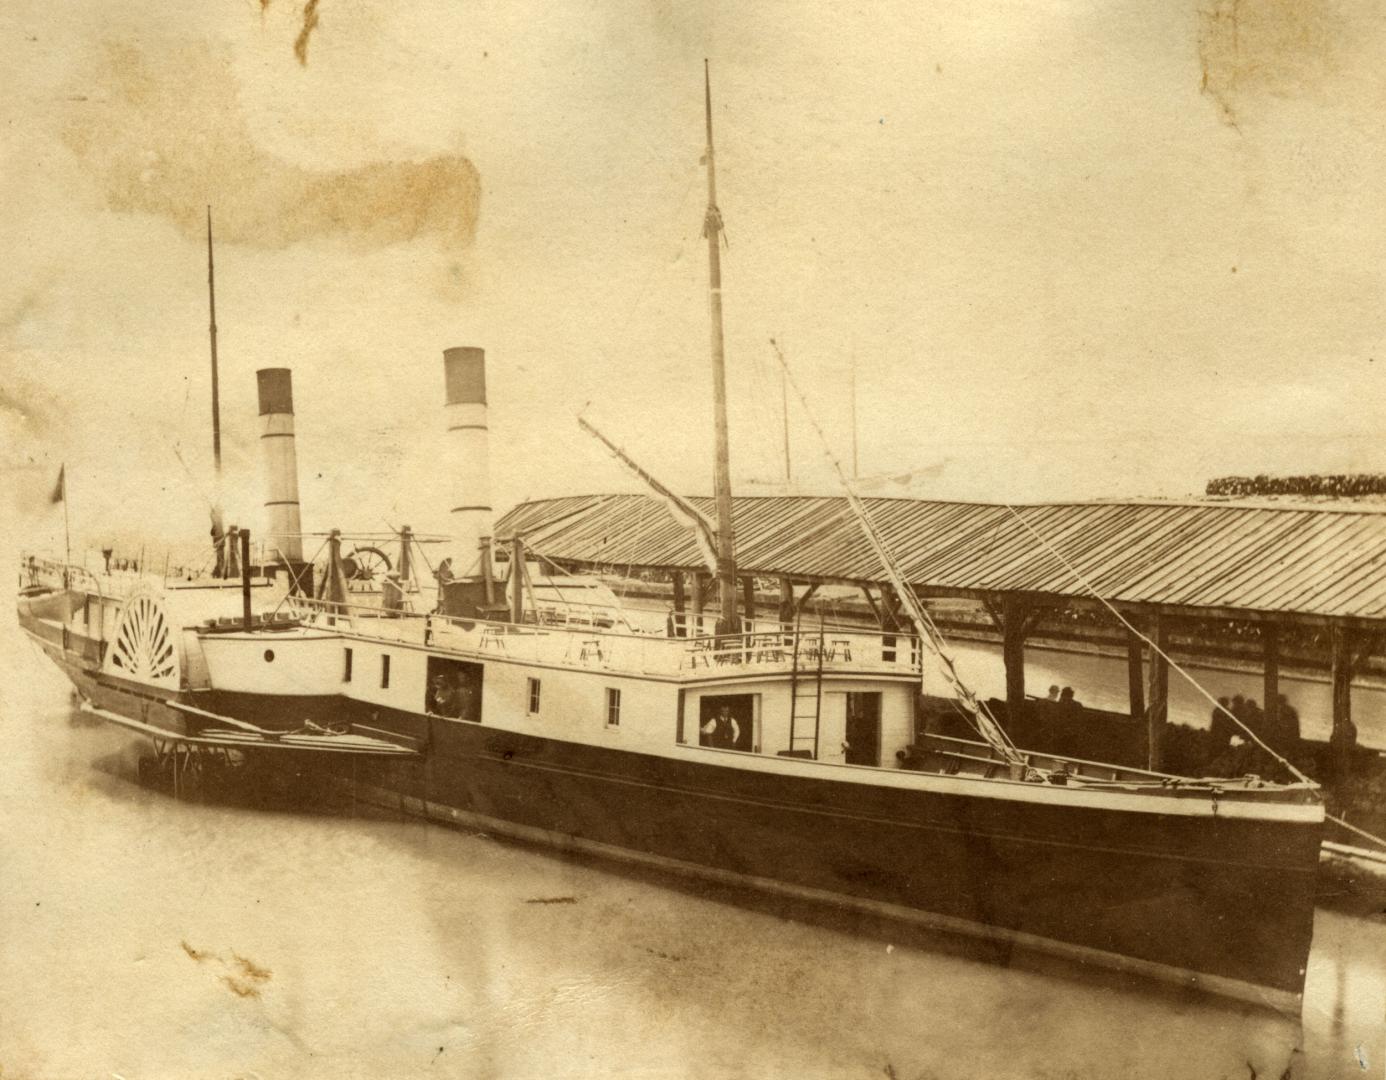 Image shows a paddle steamer by the wharf.